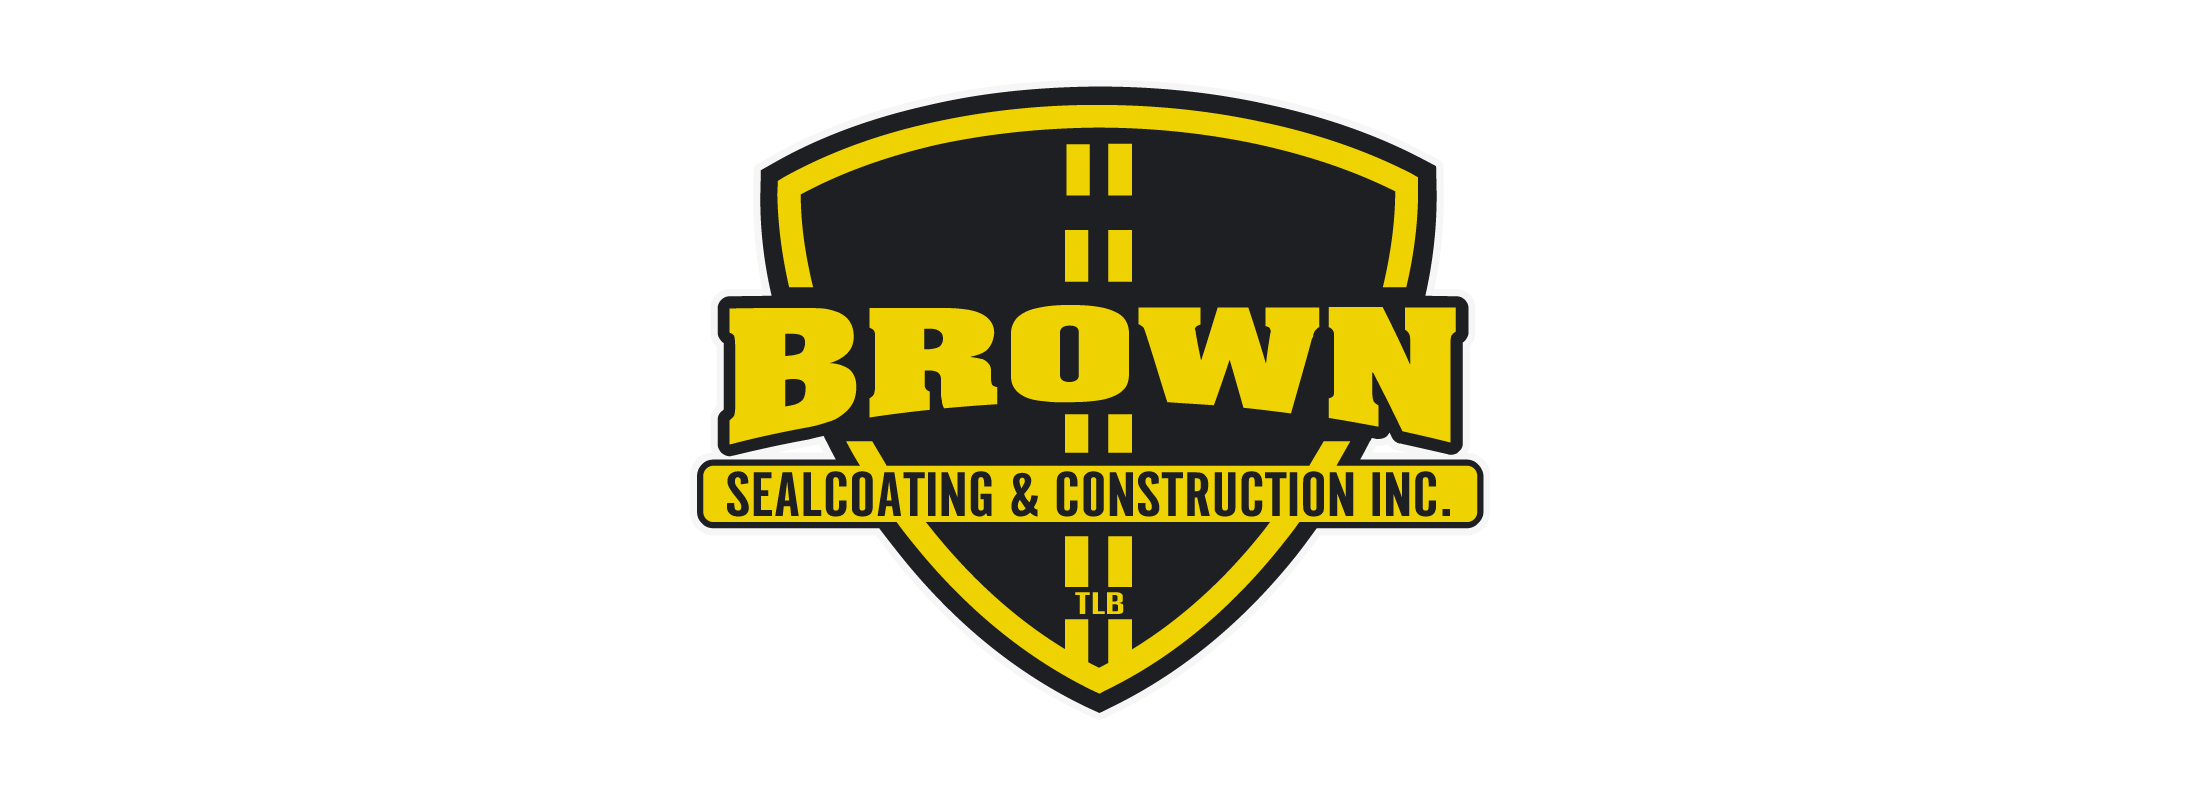 Brown Sealcoating & Construction Inc.